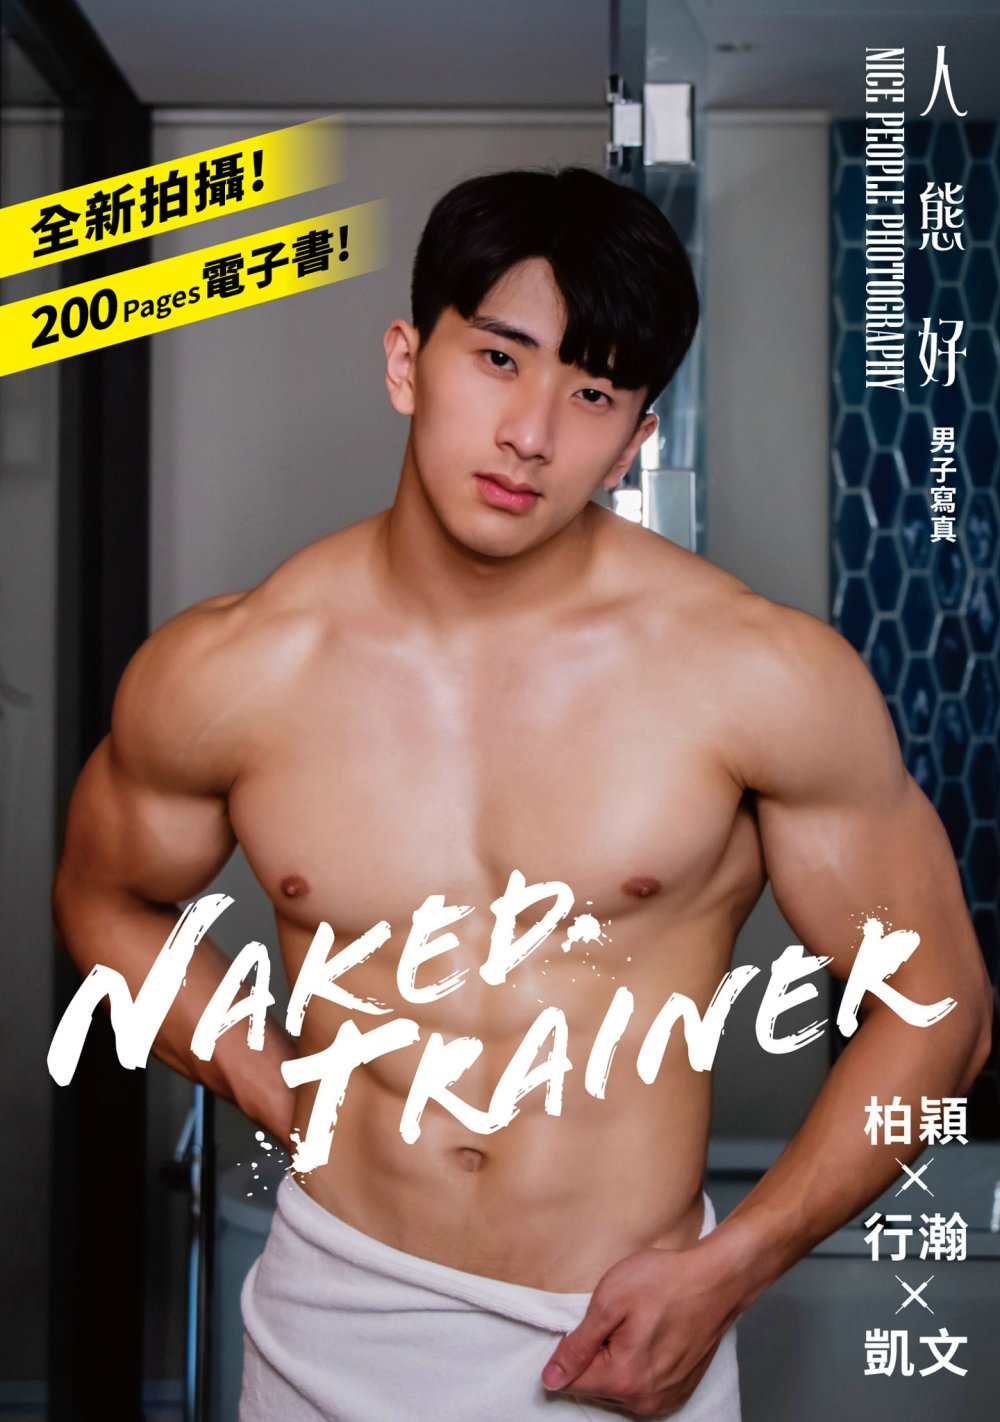 NAKED TRAINER：人態好NICE PEOPLE PHOTOGRAPHY男子寫真 (電子書)